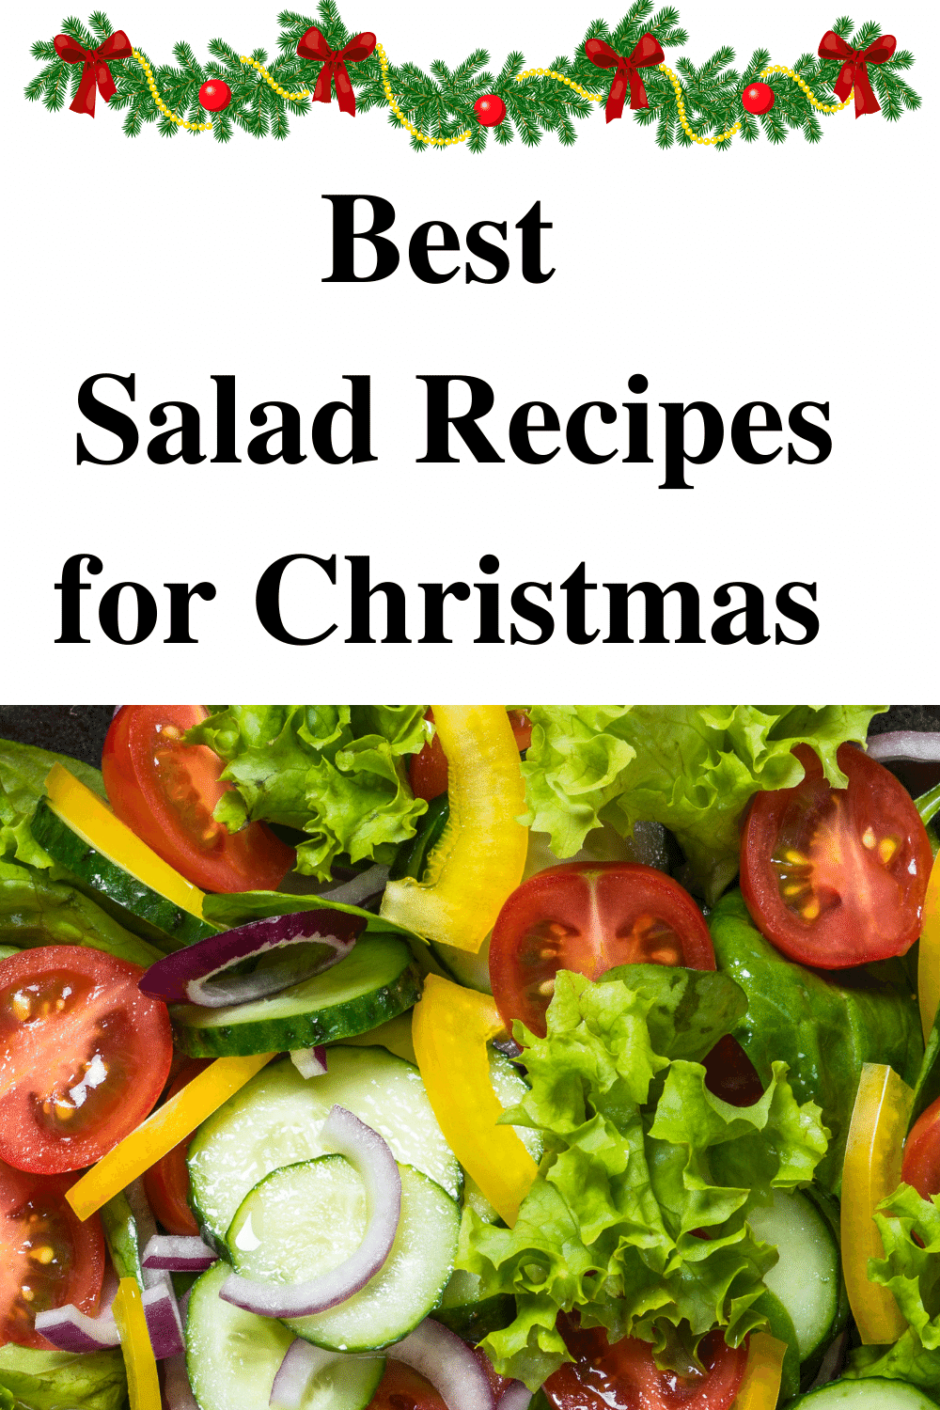 Best Salad Recipes for Christmas